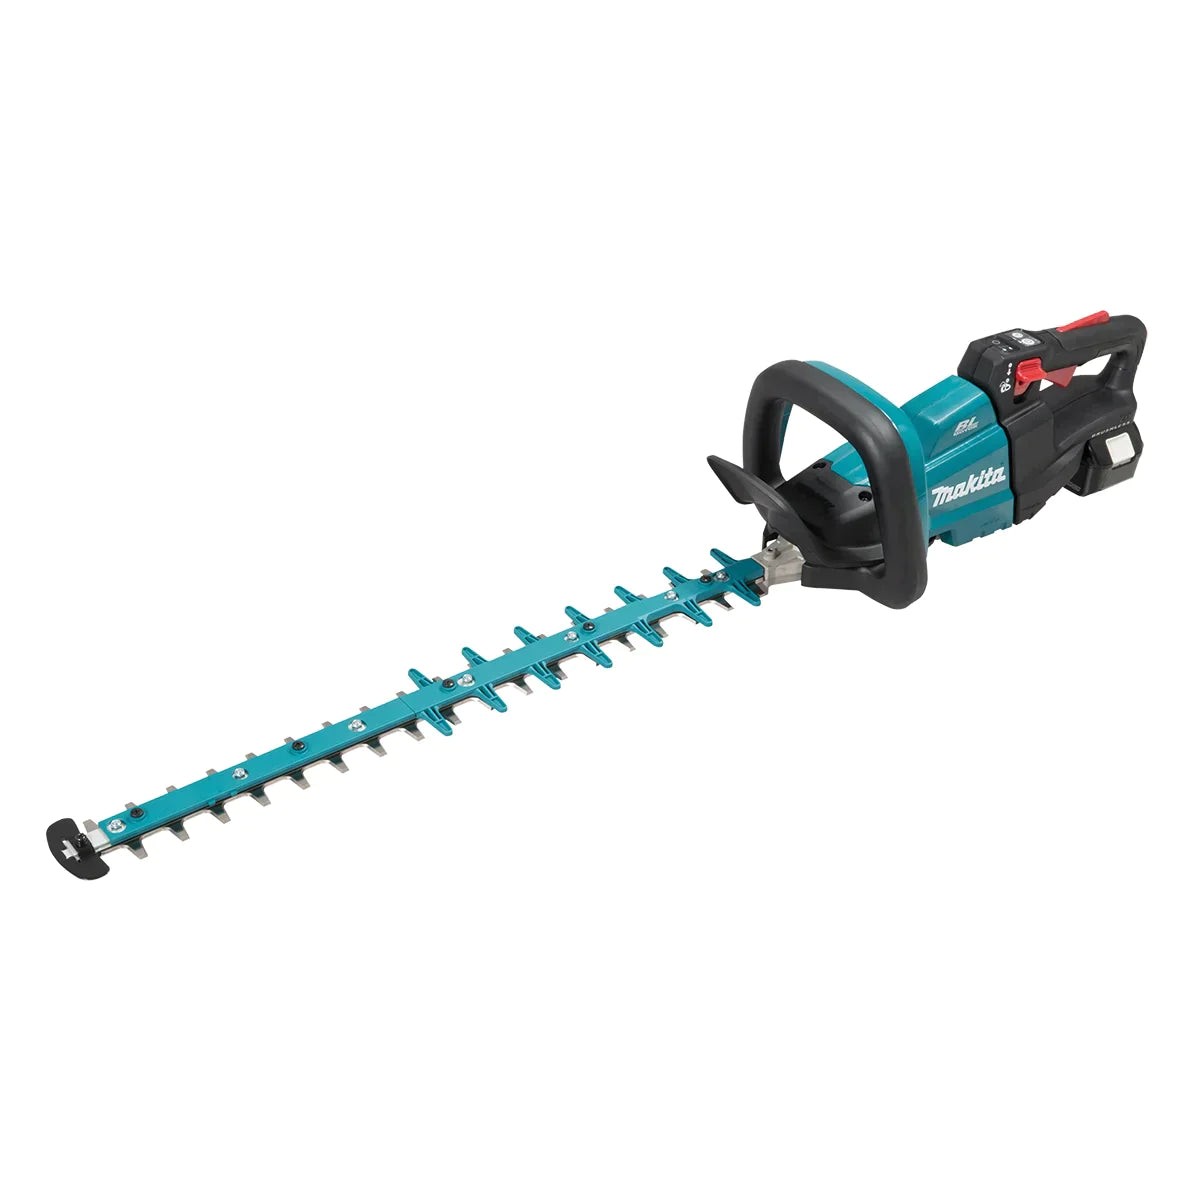 Makita 18V Cordless Hedge Trimmer DUH602Z 600Mm - Solo Power Tool Services